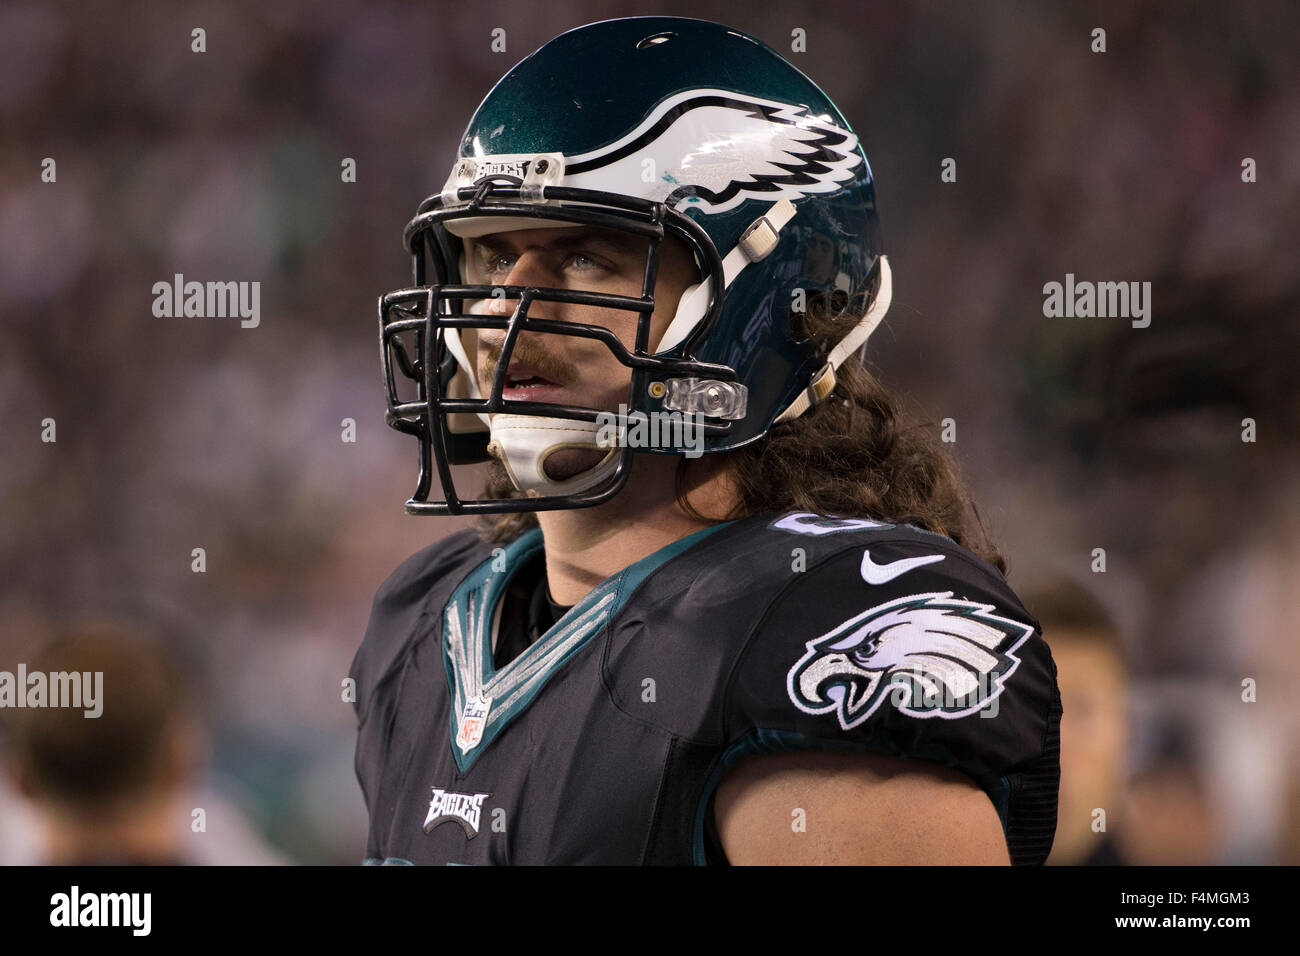 Philadelphia, Pennsylvania, USA. 19th Oct, 2015. Philadelphia Eagles guard Dennis Kelly (67) looks on during the NFL game between the New York Giants and the Philadelphia Eagles at Lincoln Financial Field in Philadelphia, Pennsylvania. The Philadelphia Eagles won 27-7. Christopher Szagola/CSM/Alamy Live News Stock Photo